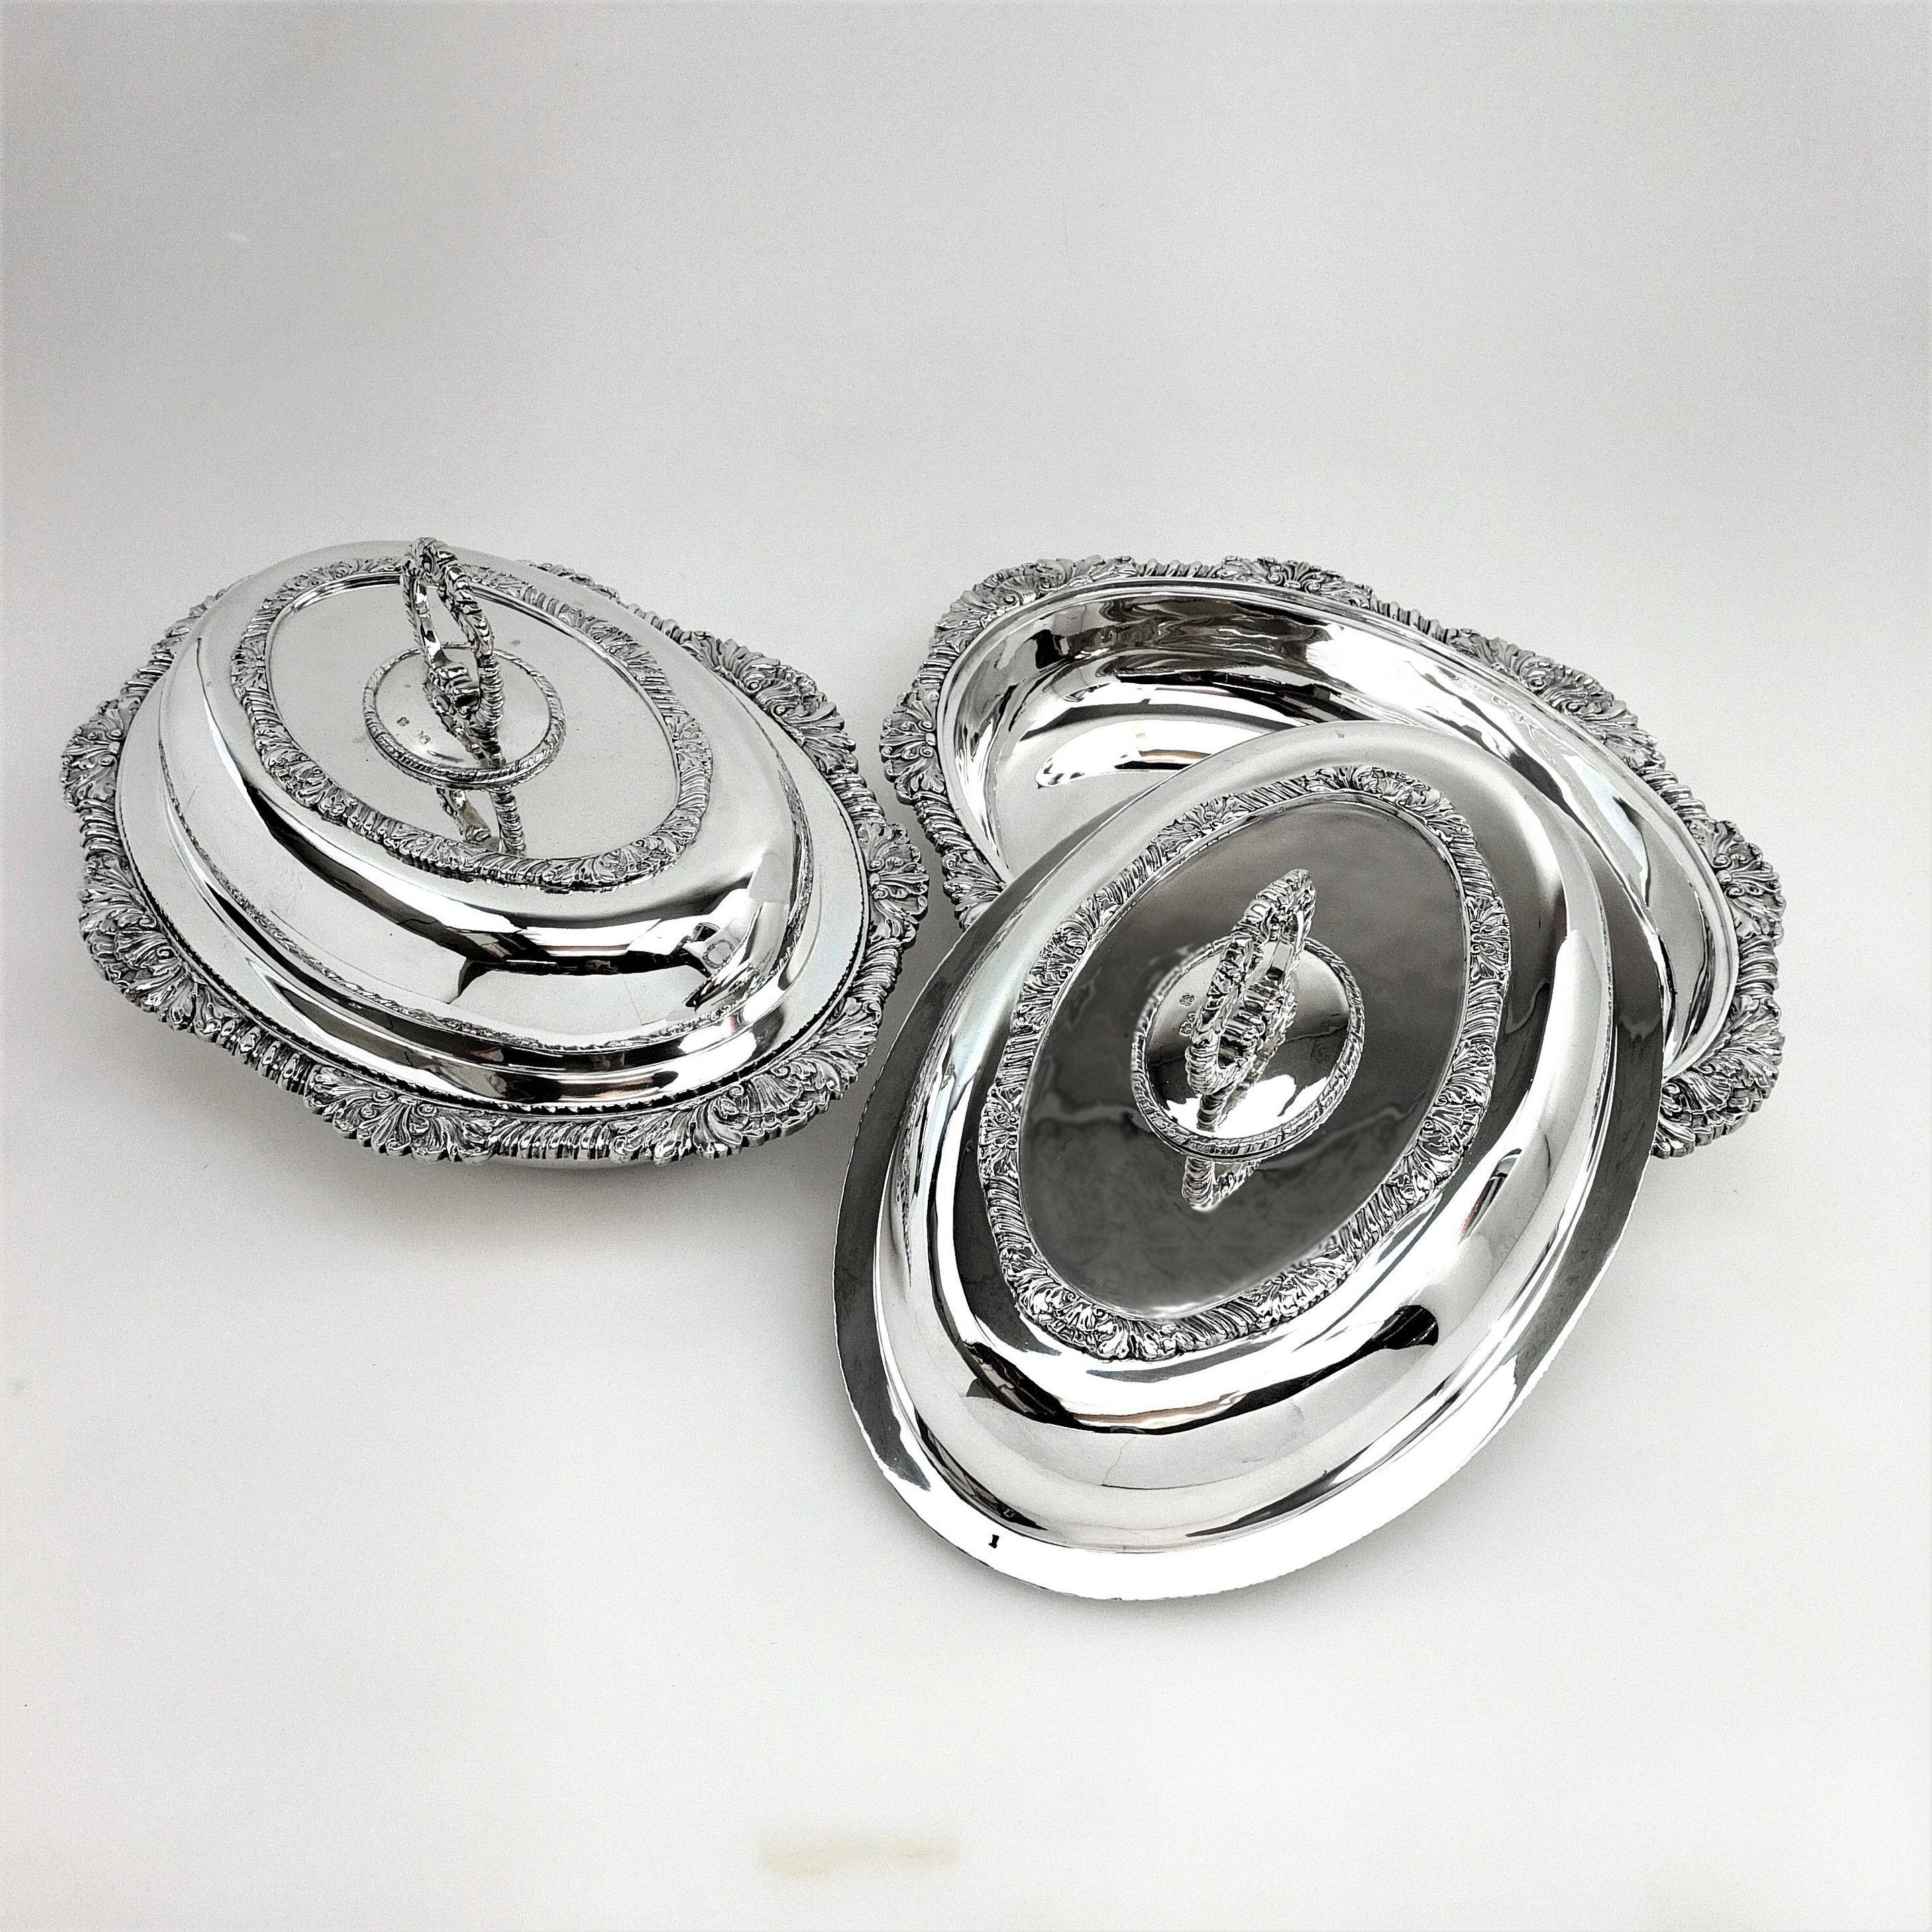 sterling silver serving dishes